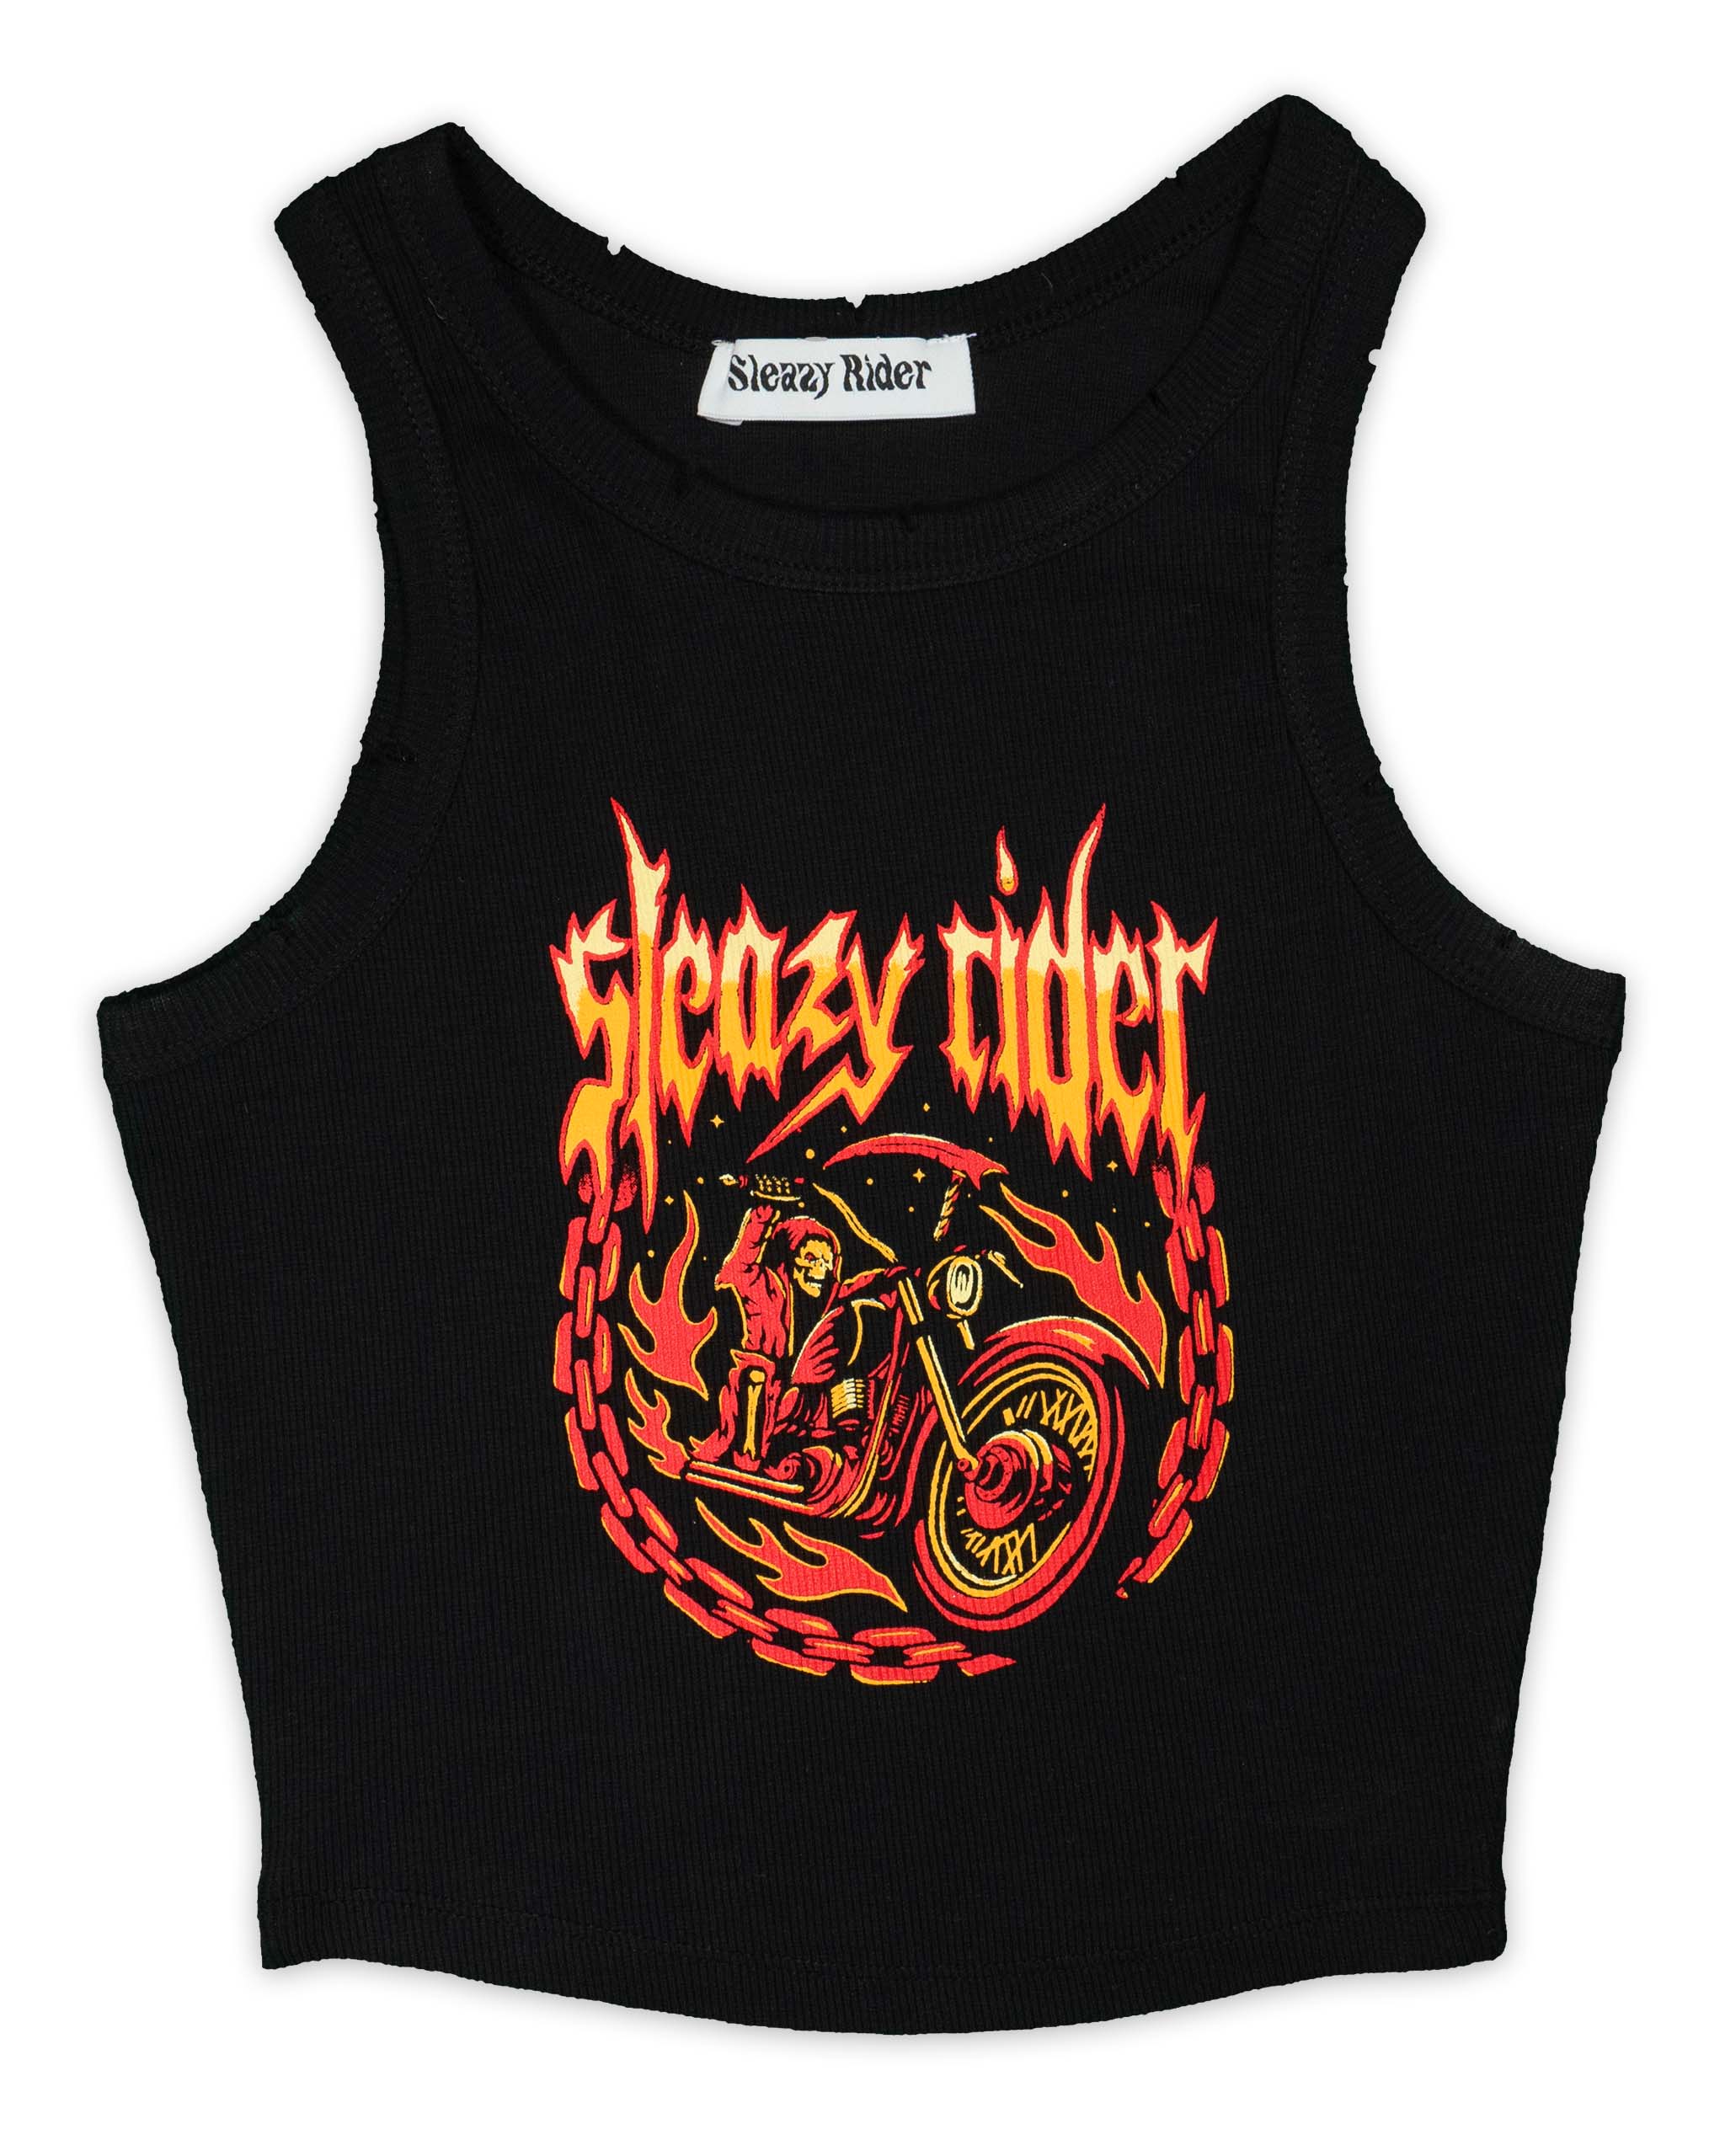 Flaming Reaper tank top by Sleazy Rider